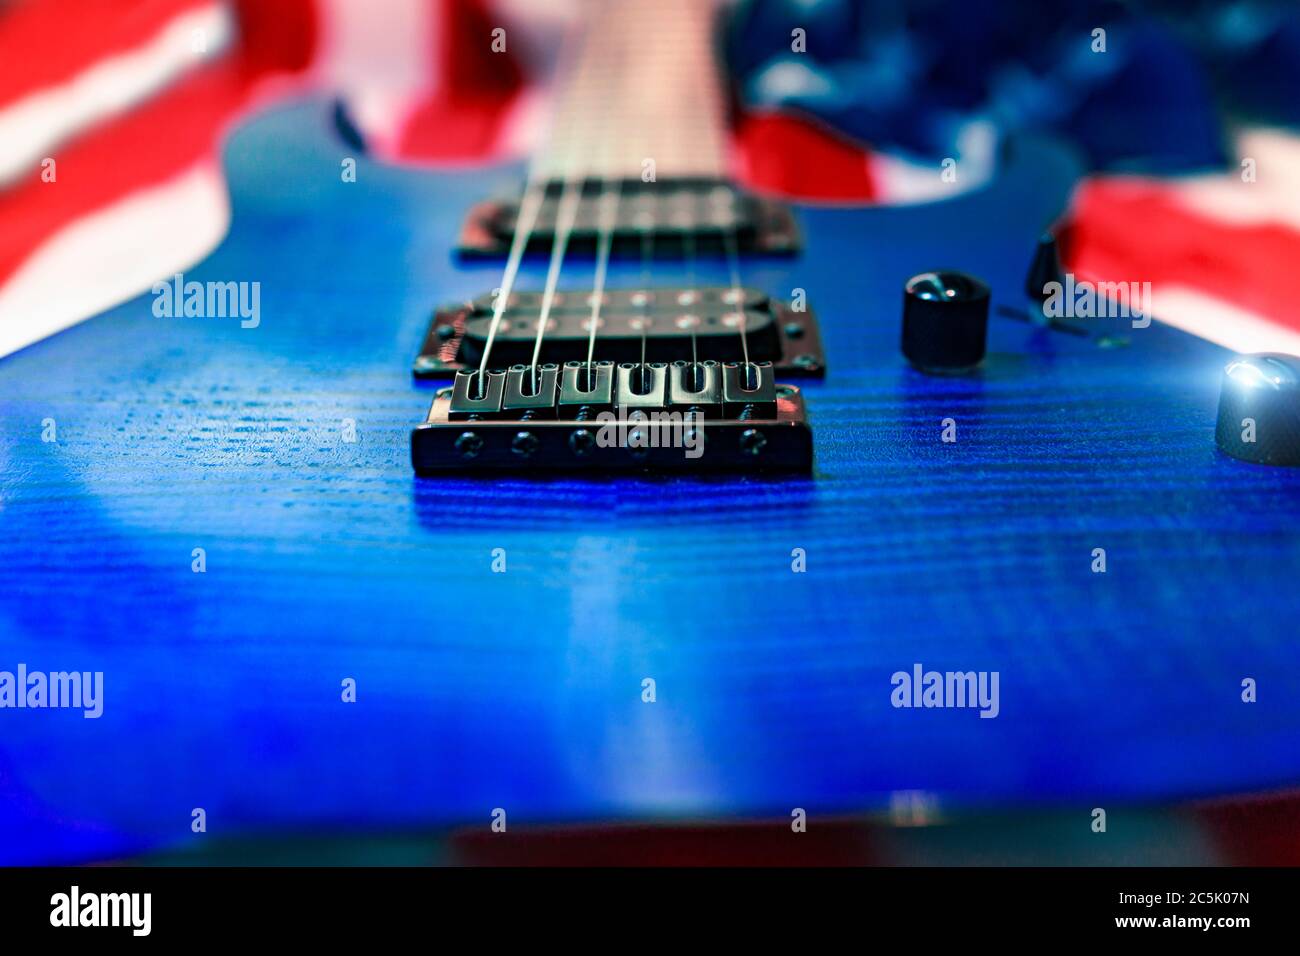 Close Up Blue Electric Guitar Music Instrument Rock With American Flag Stock Photo